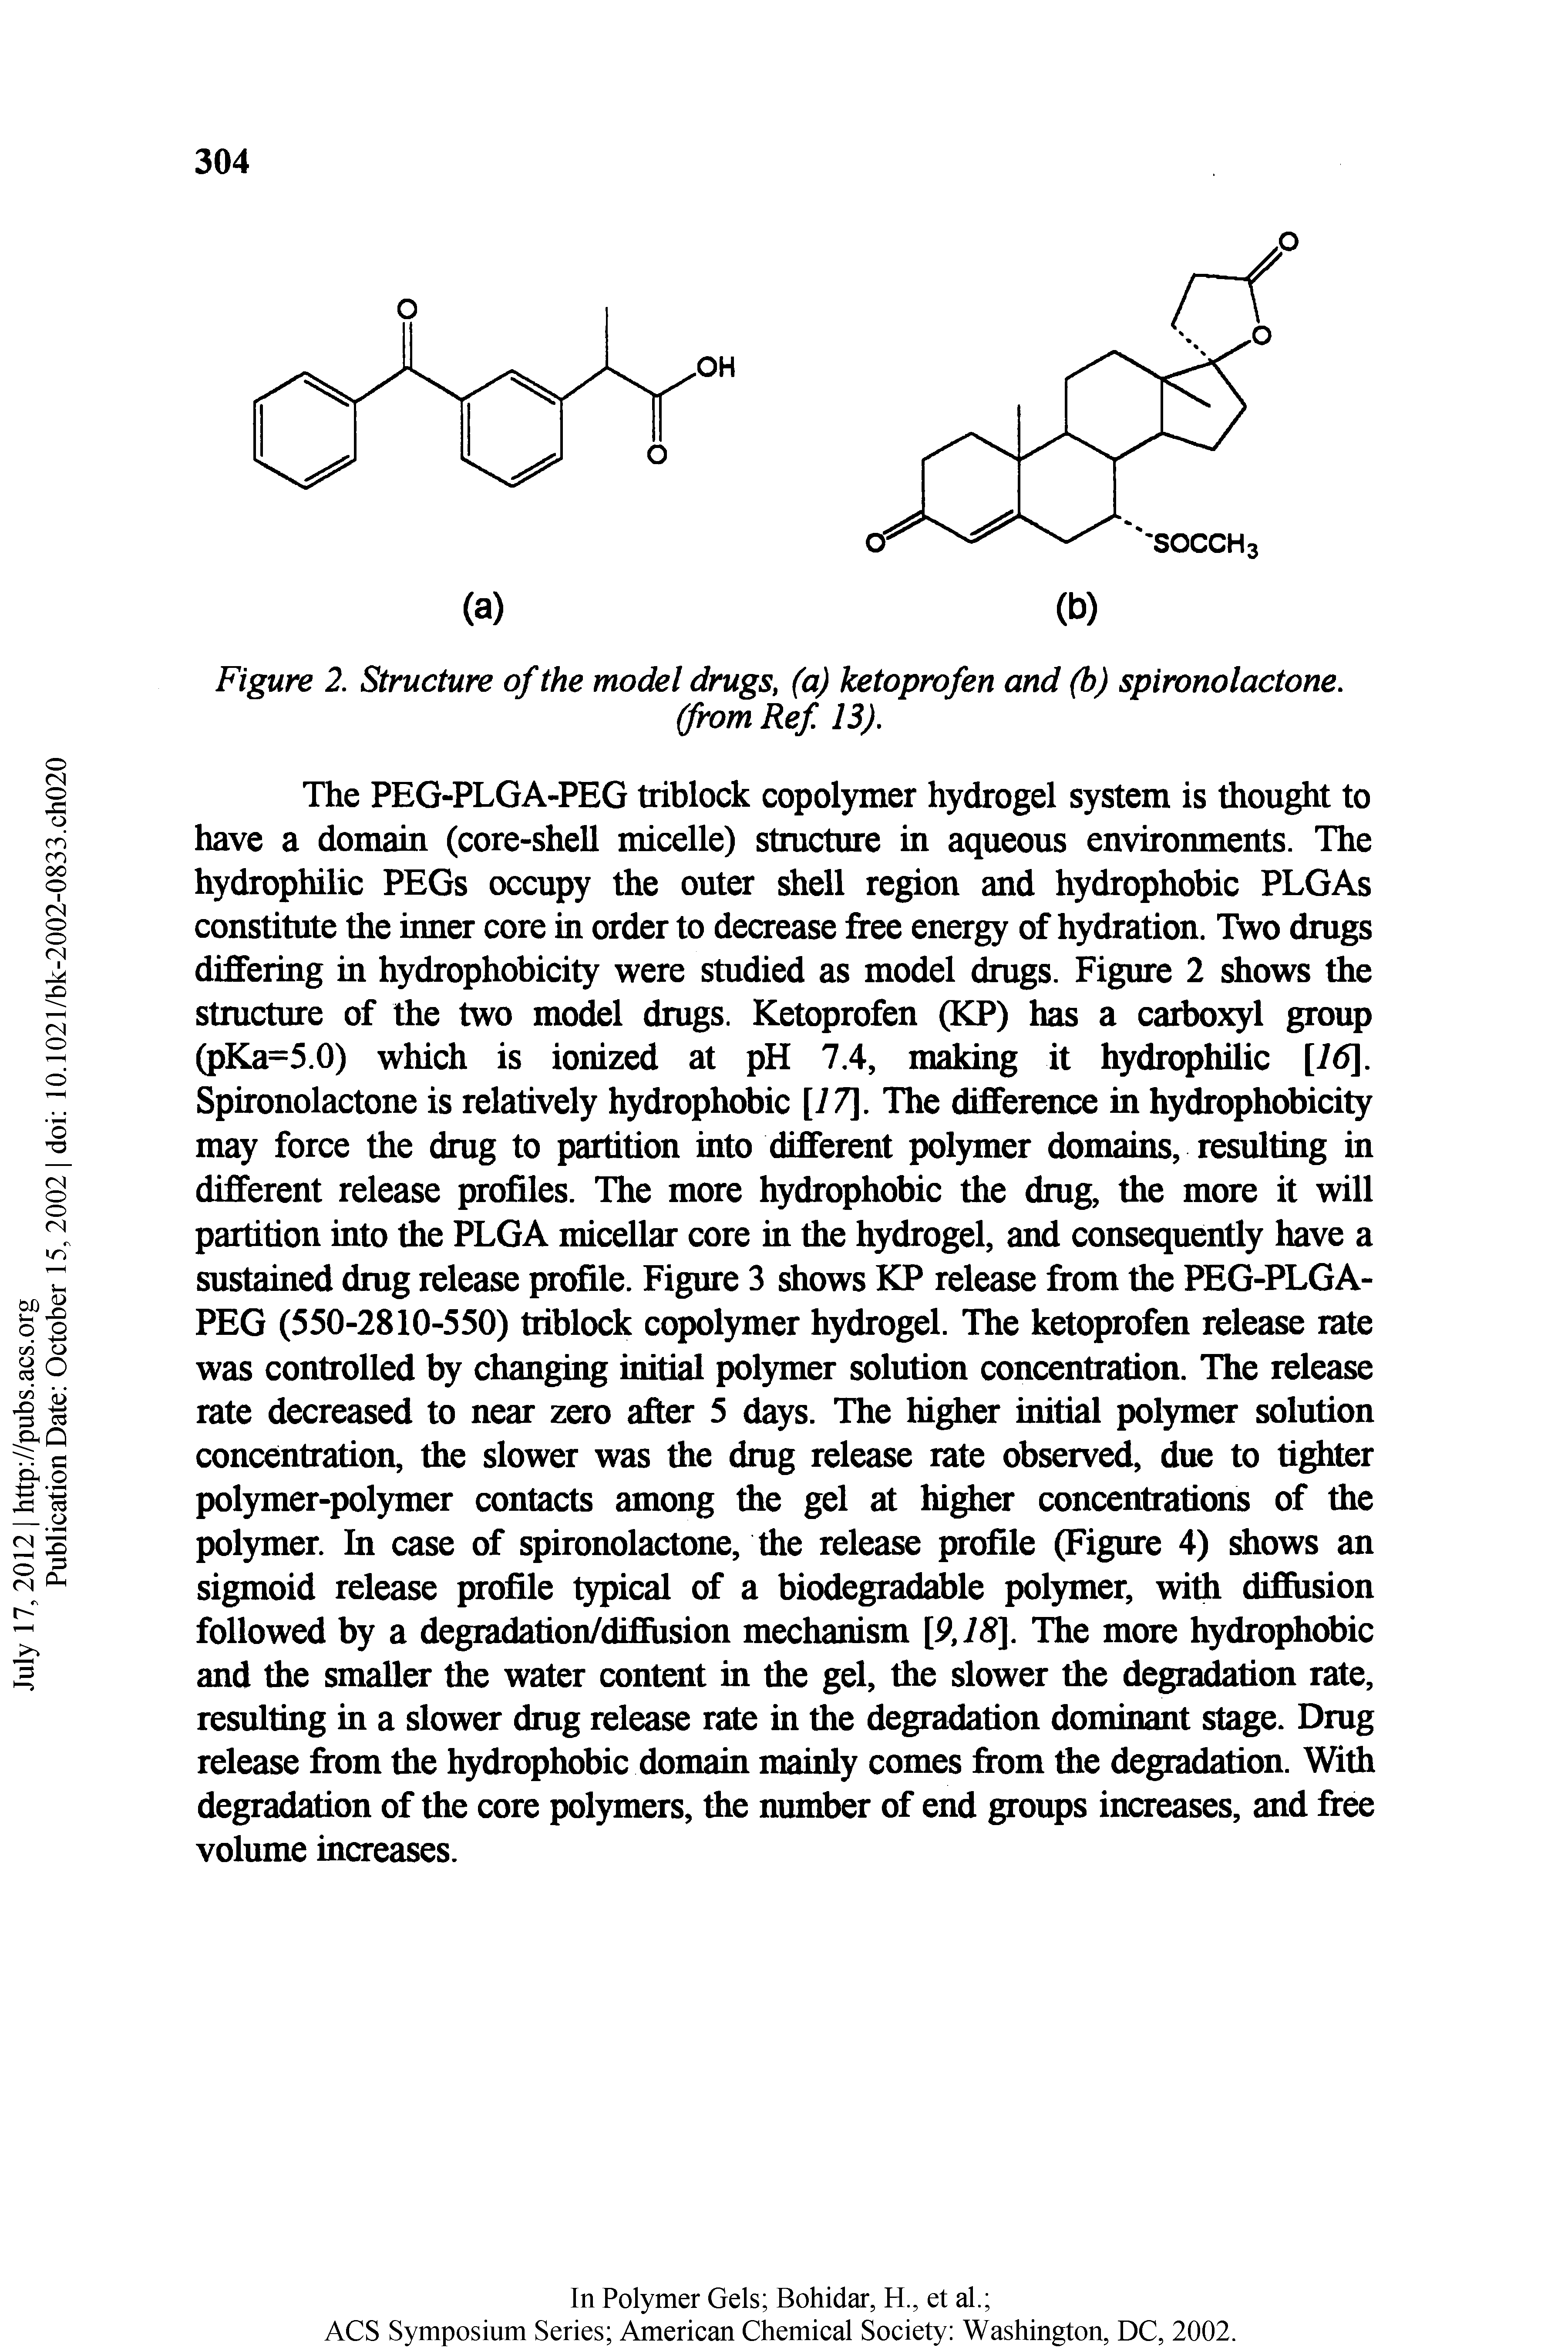 Figure 2. Structure of the model drugs, (a) ketoprofen and (b) spironolactone.